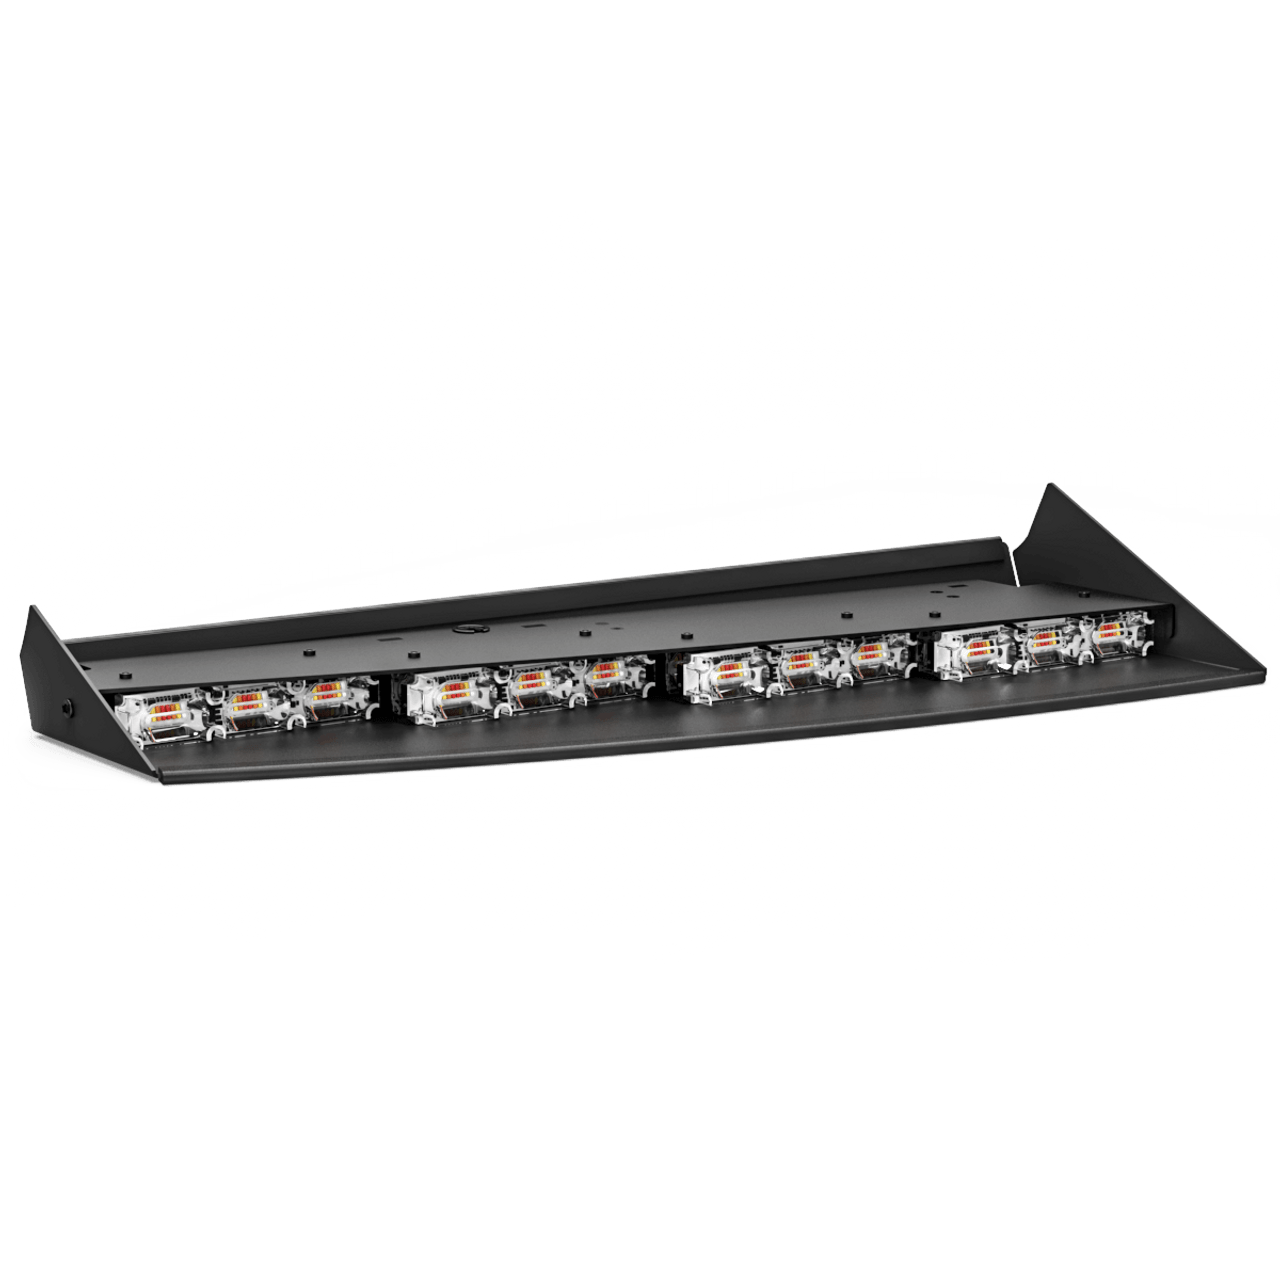 Feniex Q-0920-CHG-21-22 Quad, Dodge Charger, 2021-2022 Interior Light Bar, Front Facing, Four LED Colors Each Side (Red, Blue, White and Amber)